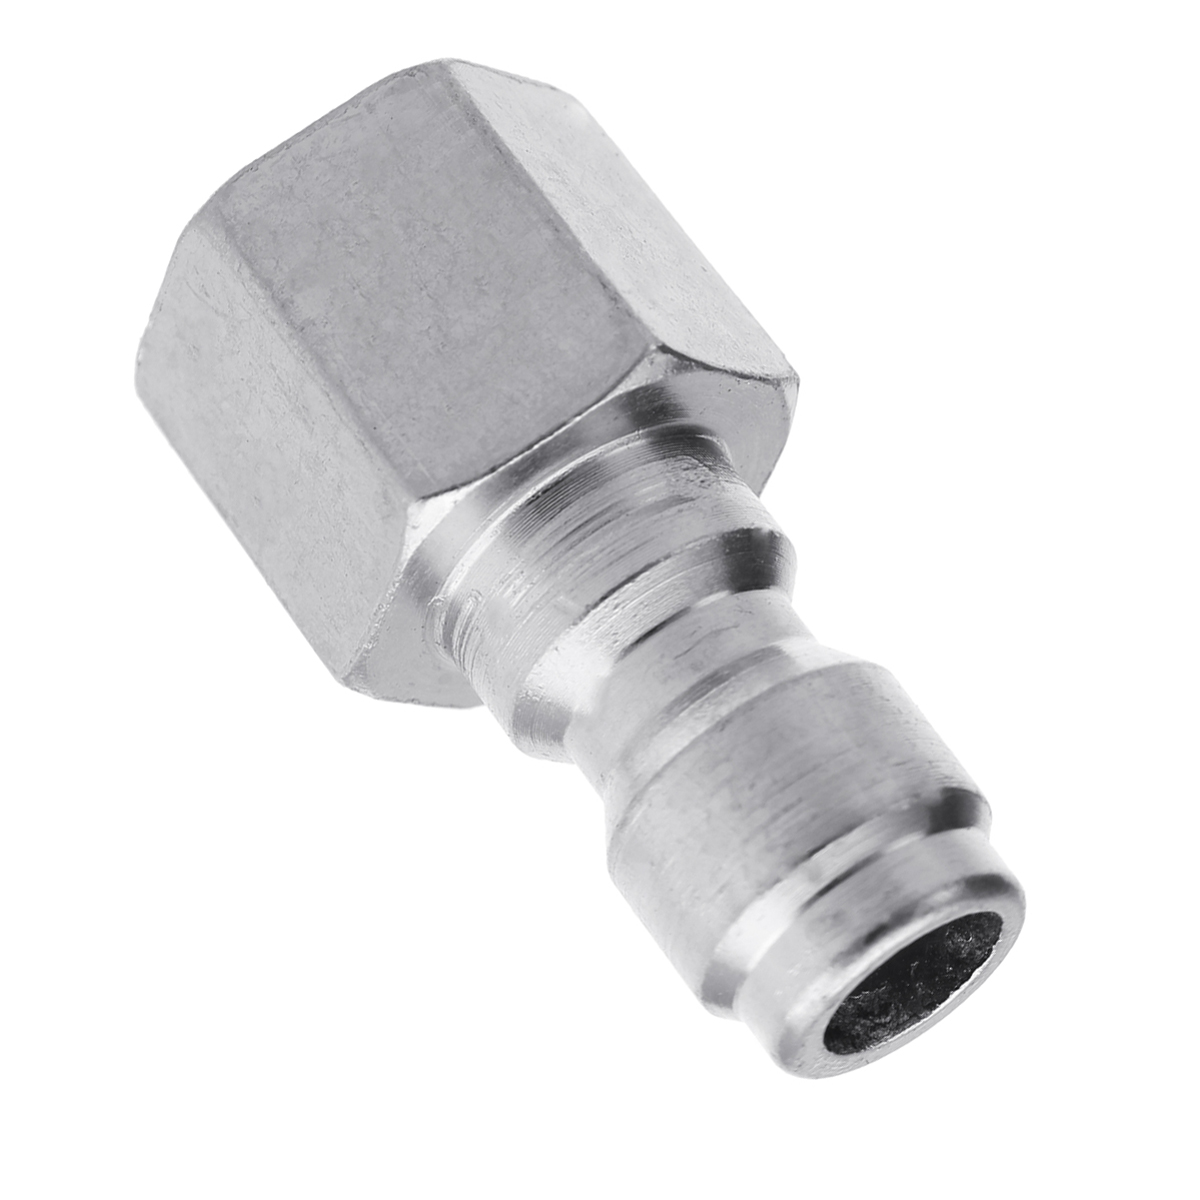 14-Inch-F-Quick-Release-Adapter-Connector-for-Pressure-Washer-Spray-Gun-1295973-6